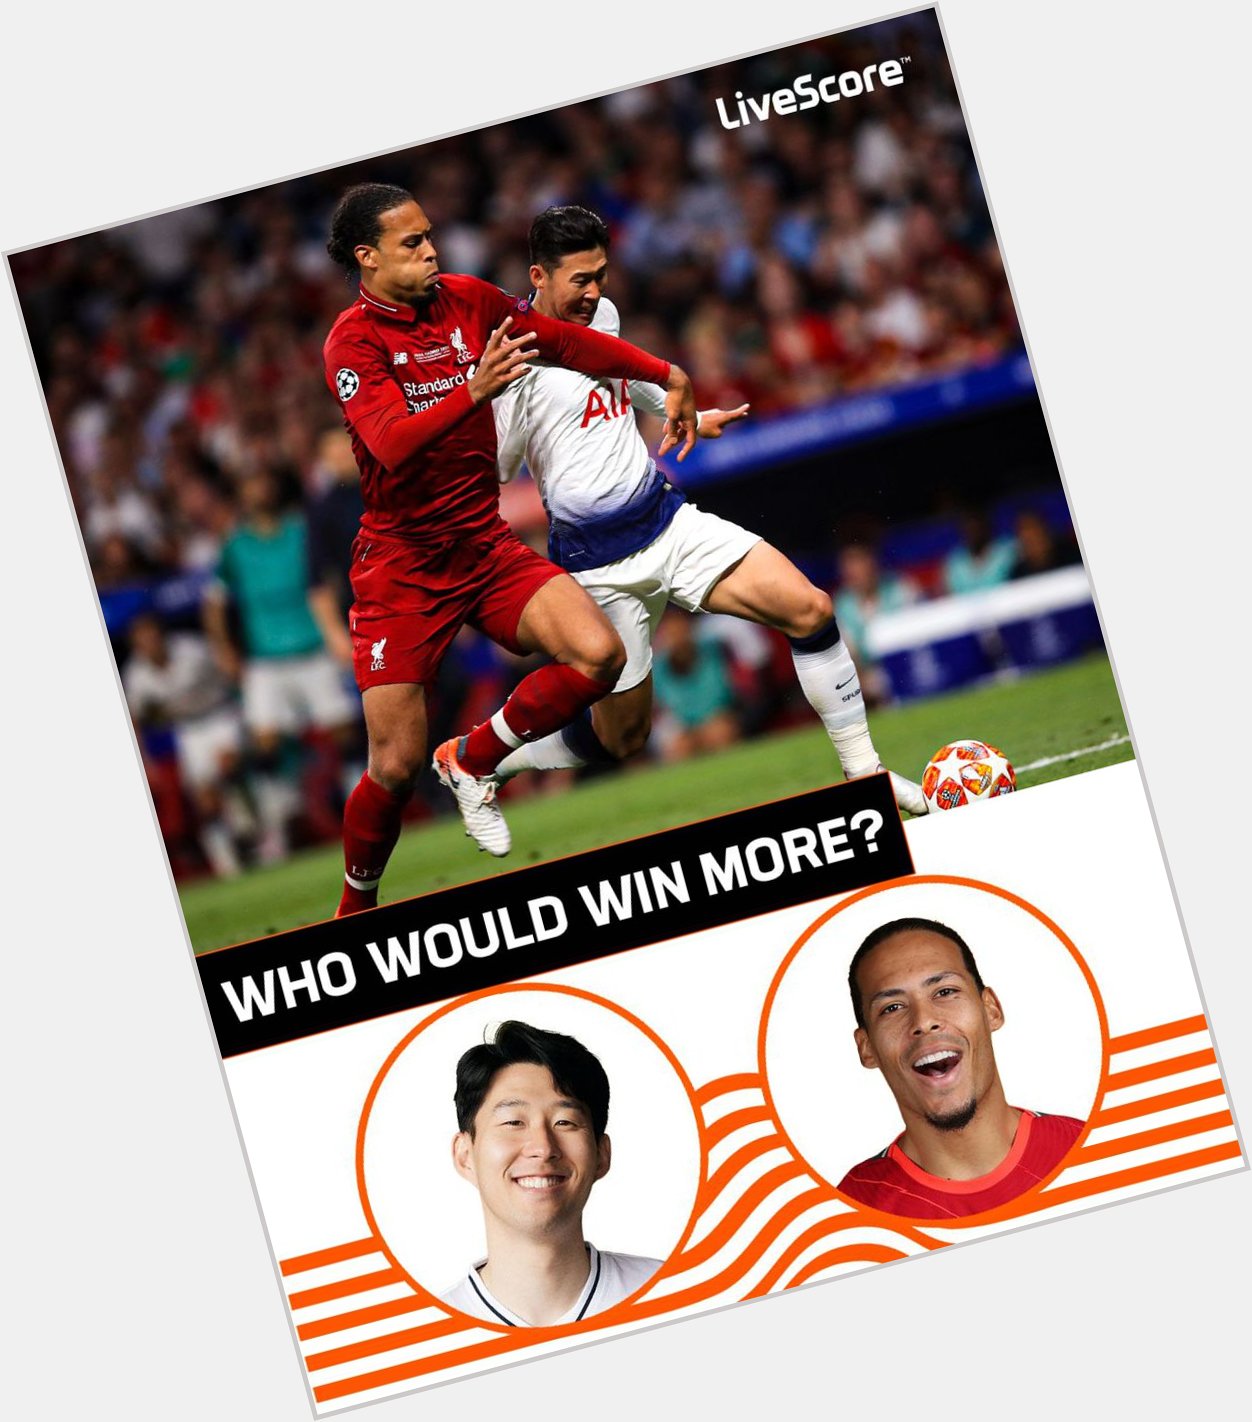 Happy birthday to both Virgil van Dijk and Heung-Min Son!    Out of 100 1v1 duels, who would win more? 